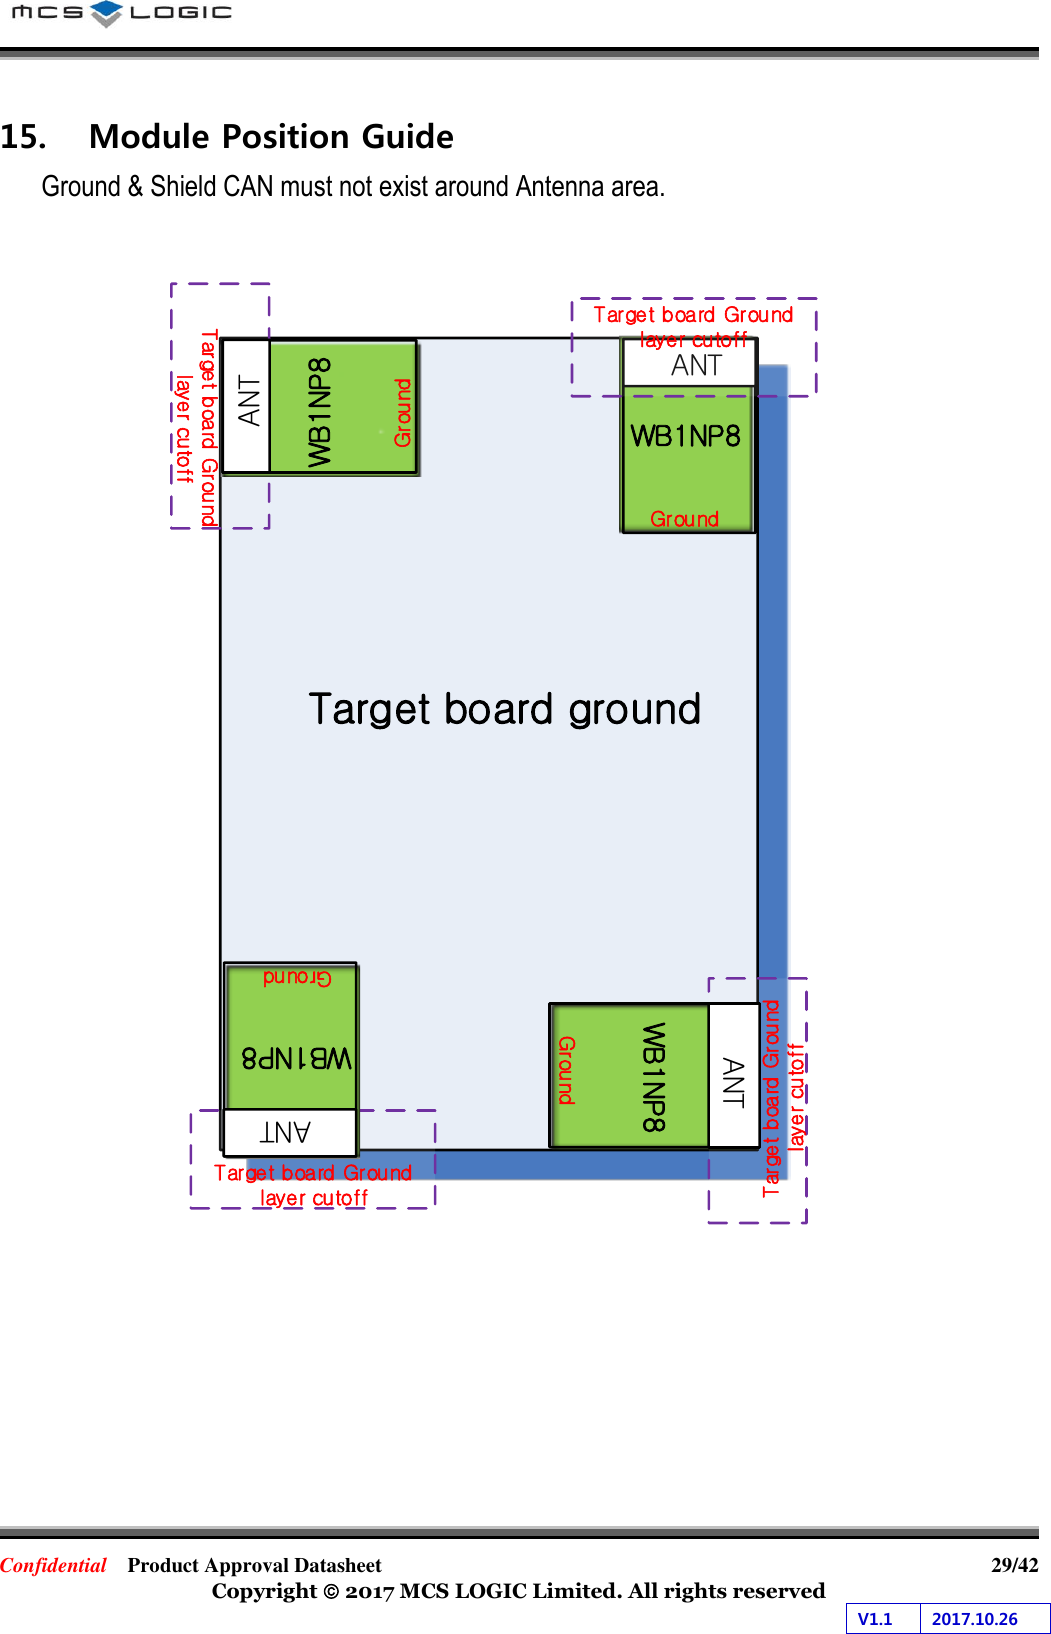 Confidential  Product Approval Datasheet  29/42 Copyright  2017 MCS LOGIC Limited. All rights reserved V1.1 2017.10.26 15. Module Position GuideGround &amp; Shield CAN must not exist around Antenna area. ANTANTGroundWB1NP8Target board groundTarget board Ground layer cutoffTarget board Ground layer cutoffTarget board Ground layer cutoffTarget board Ground layer cutoffWB1NP8ANTANTGroundANTANTGroundWB1NP8ANTANTGroundWB1NP8